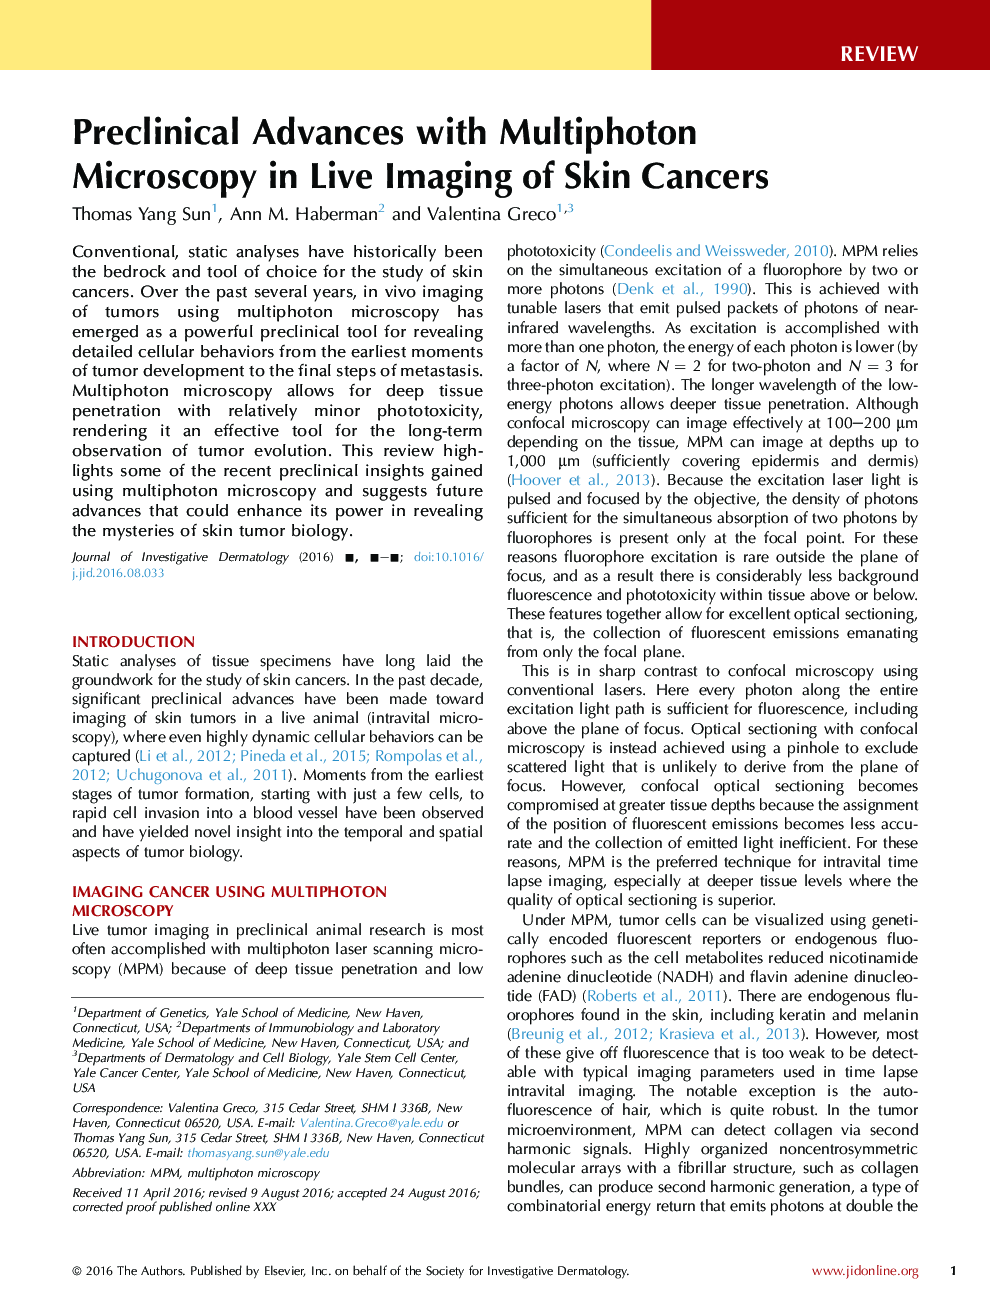 Preclinical Advances with Multiphoton Microscopy in Live Imaging of Skin Cancers